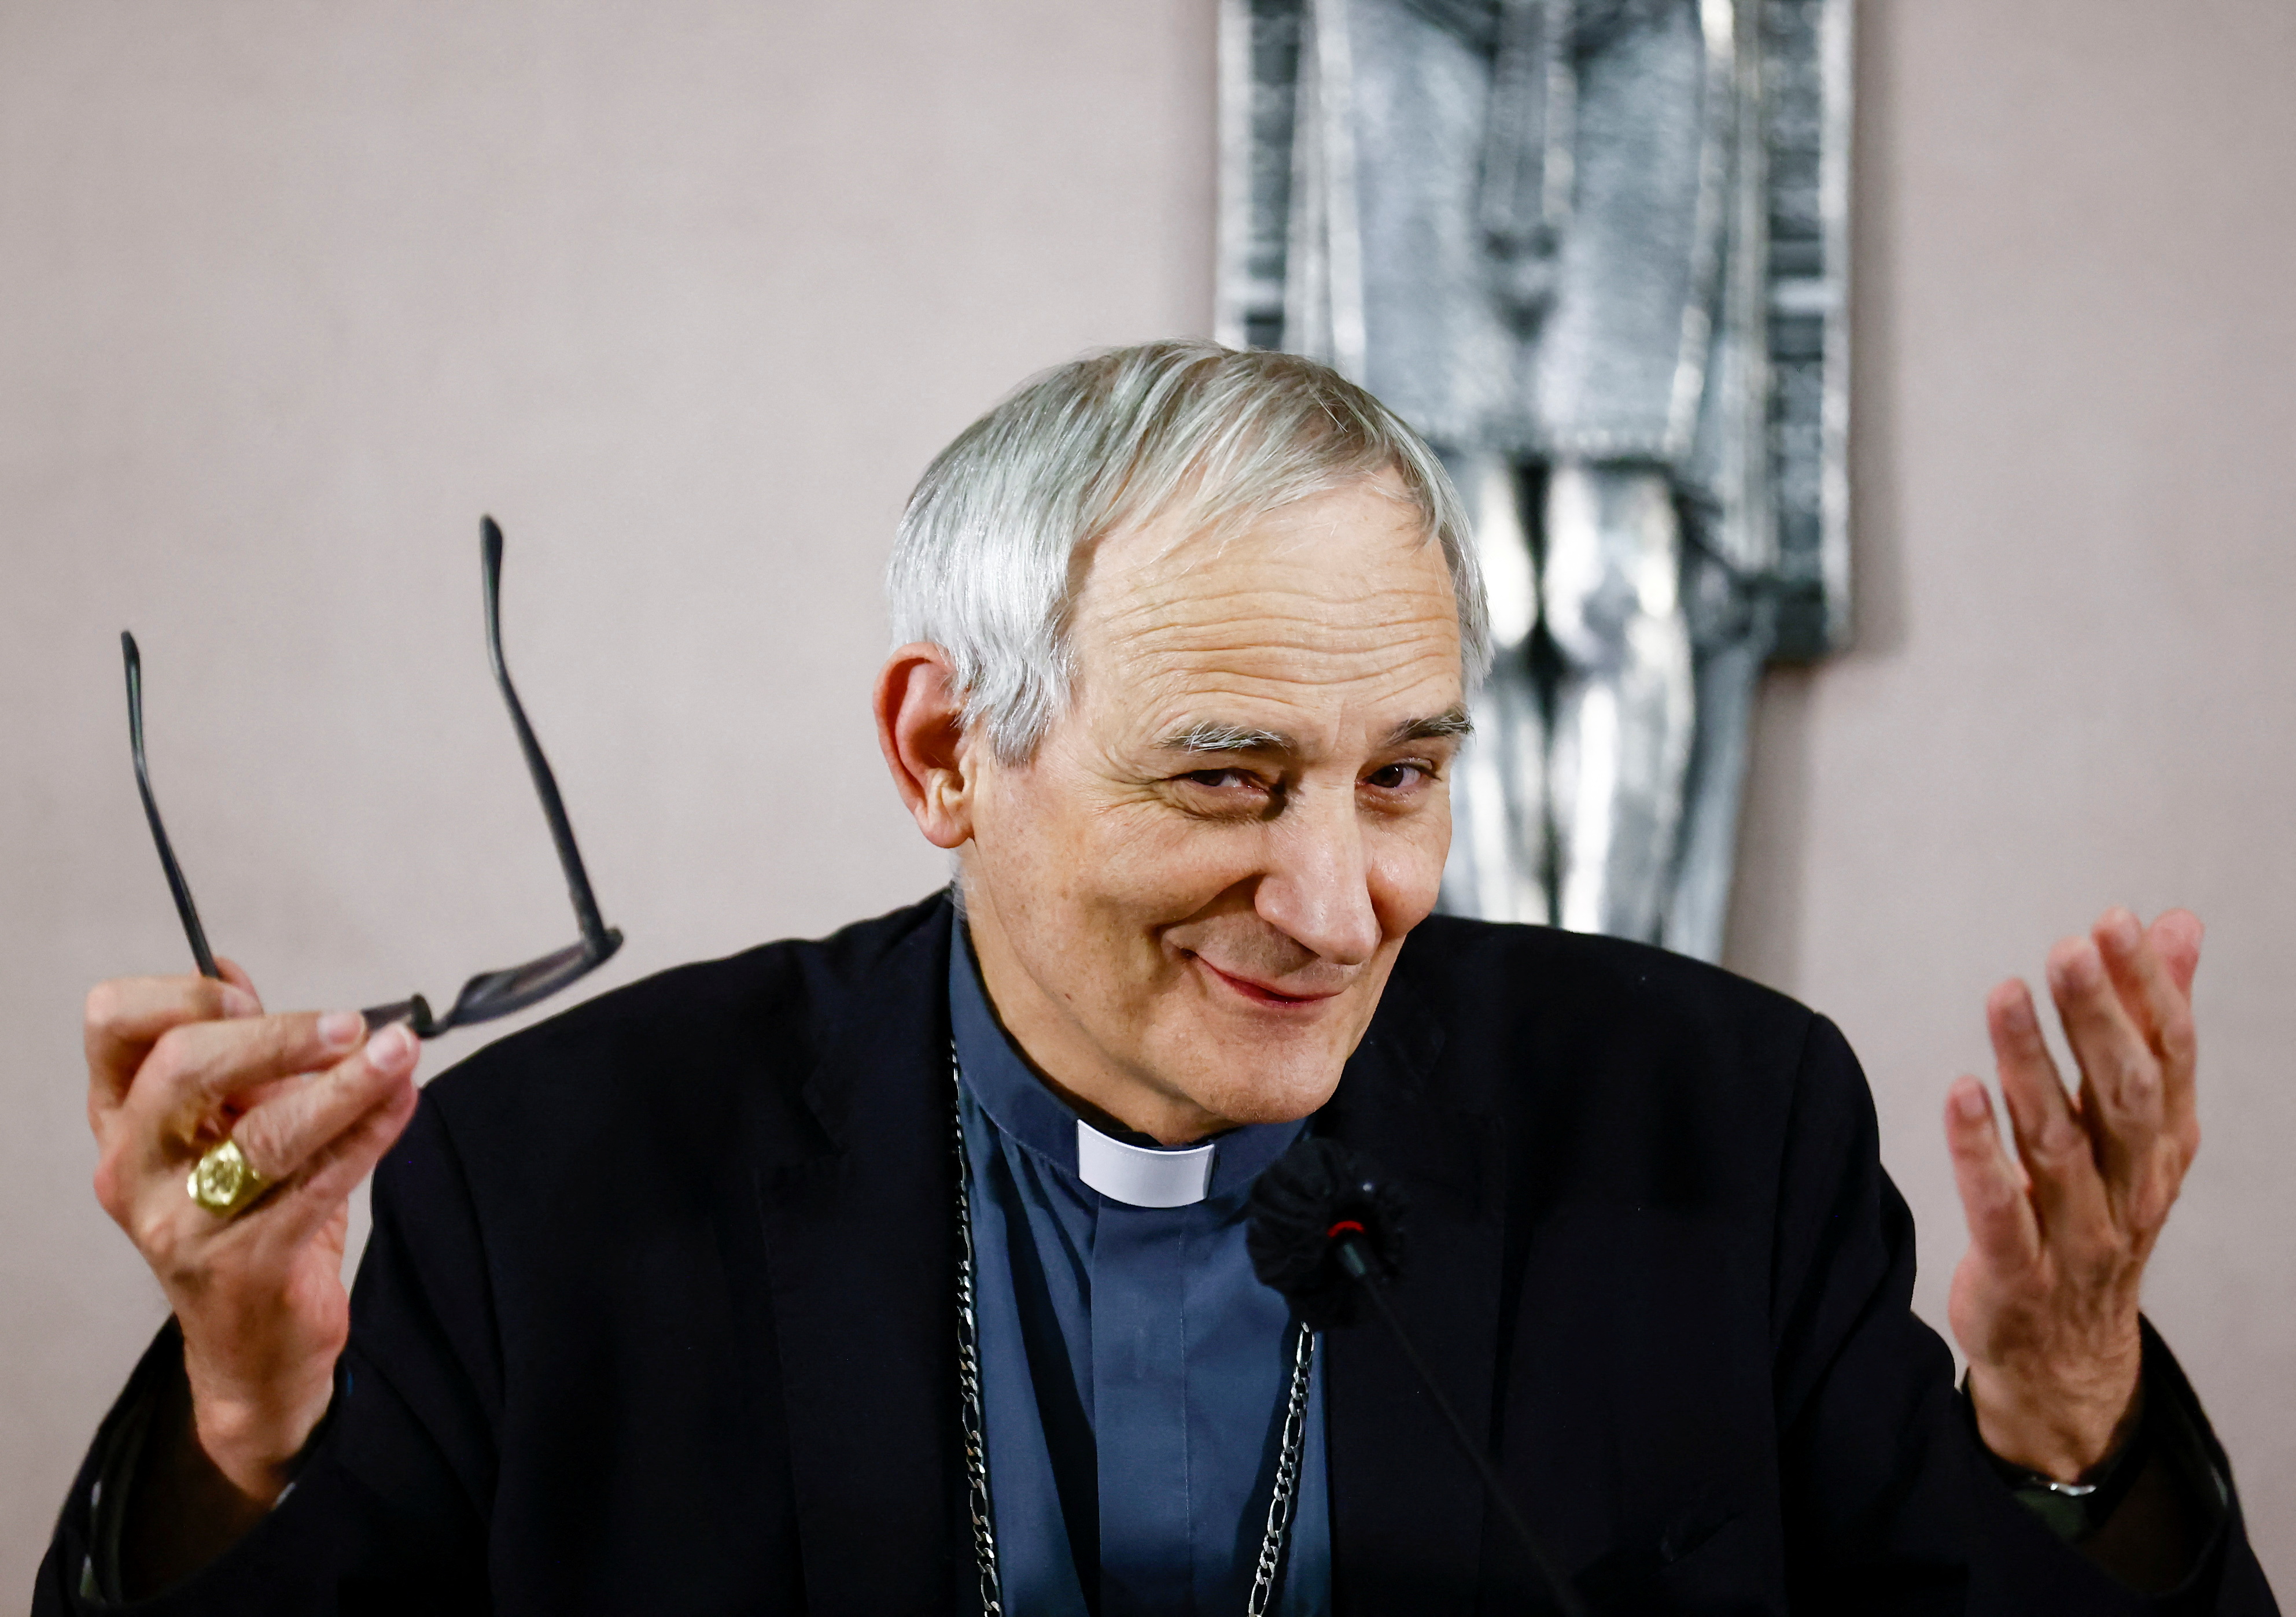 Italian Bishops' Conference (CEI) hold news conference